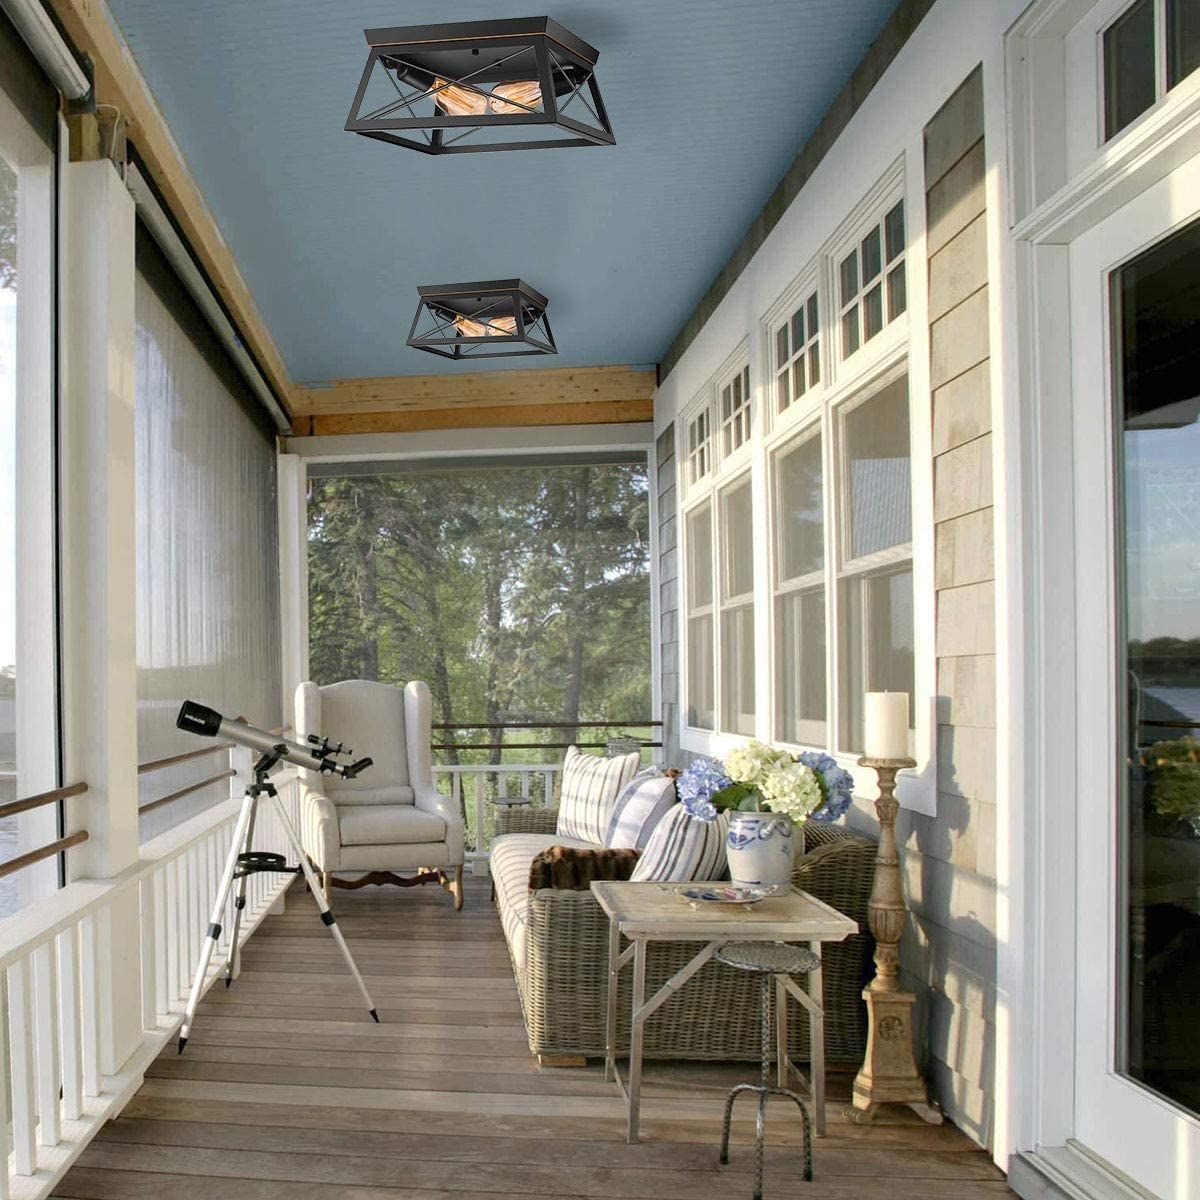 Ganeed Farmhouse Industrial Retro Ceiling Light  Semi Flush Mount Ceiling Fixture,2 Lights Rectangle Ceiling Lamp for Kitchen